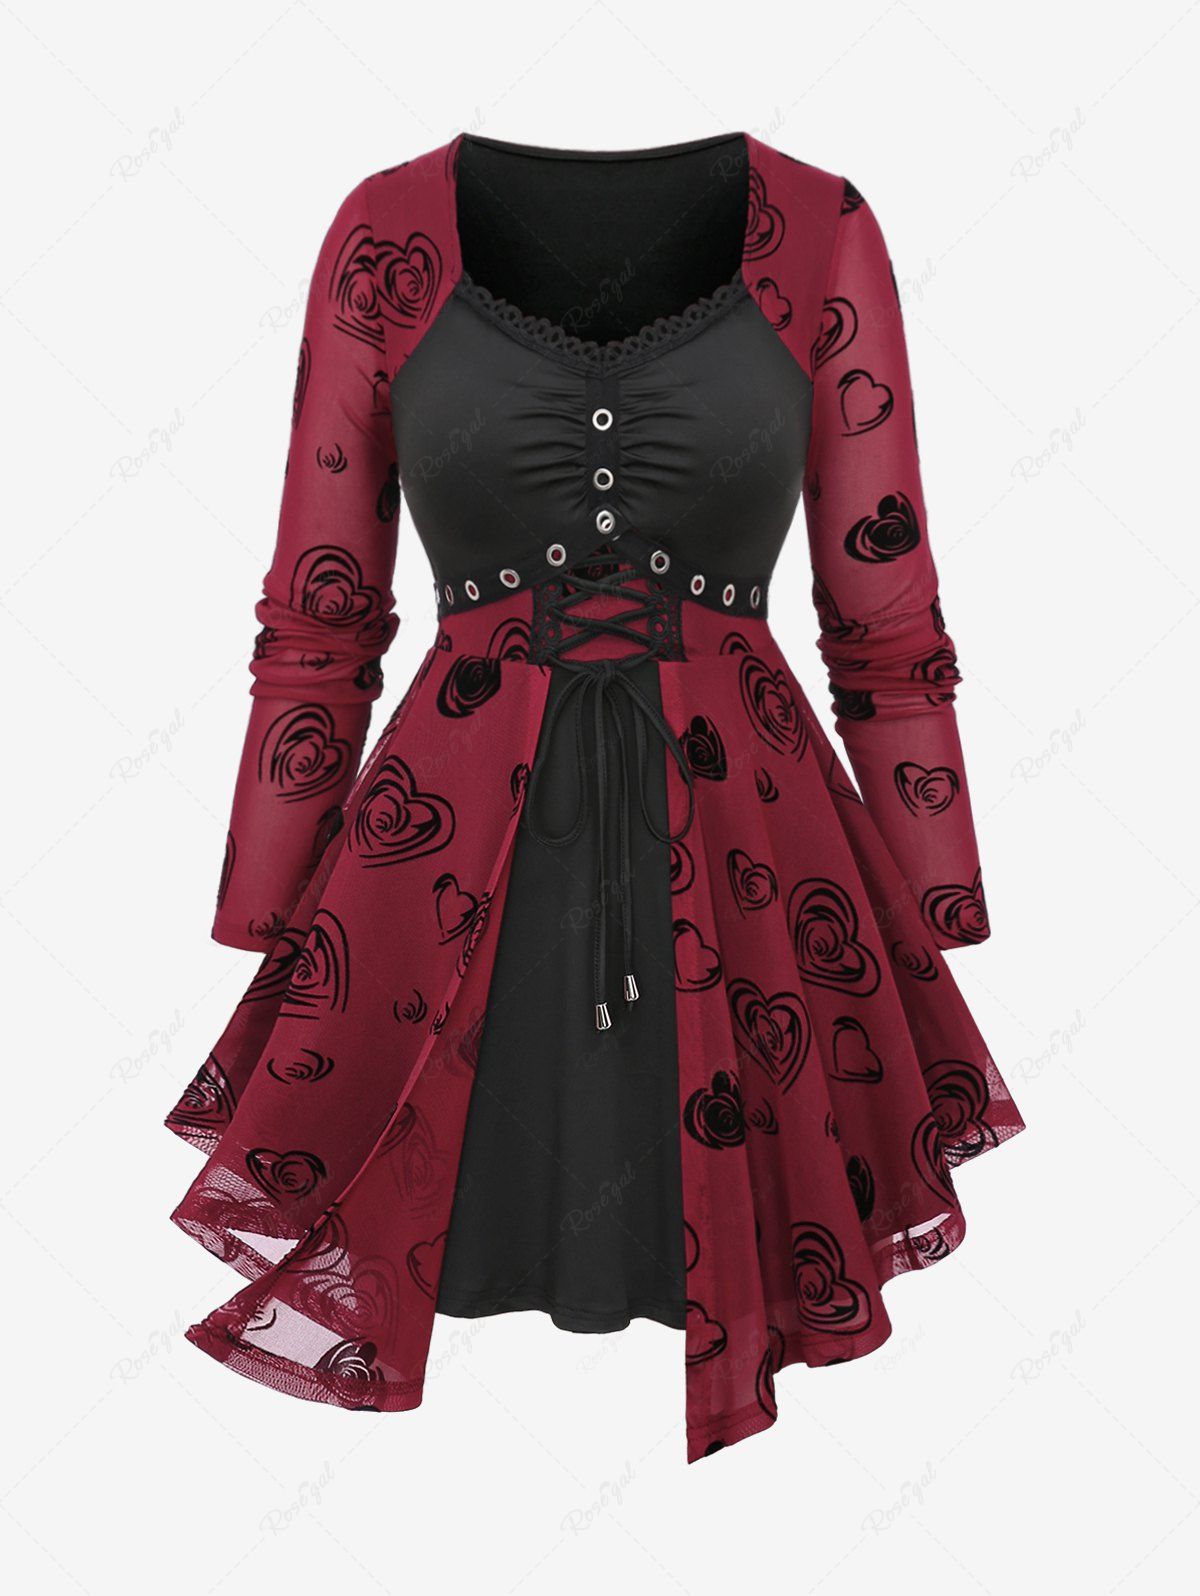 Discount Plus Size Lace Up Grommets Rose Flower Heart Flocking Mesh Ruched Asymmetrical Long Sleeve  2 In 1 Top  